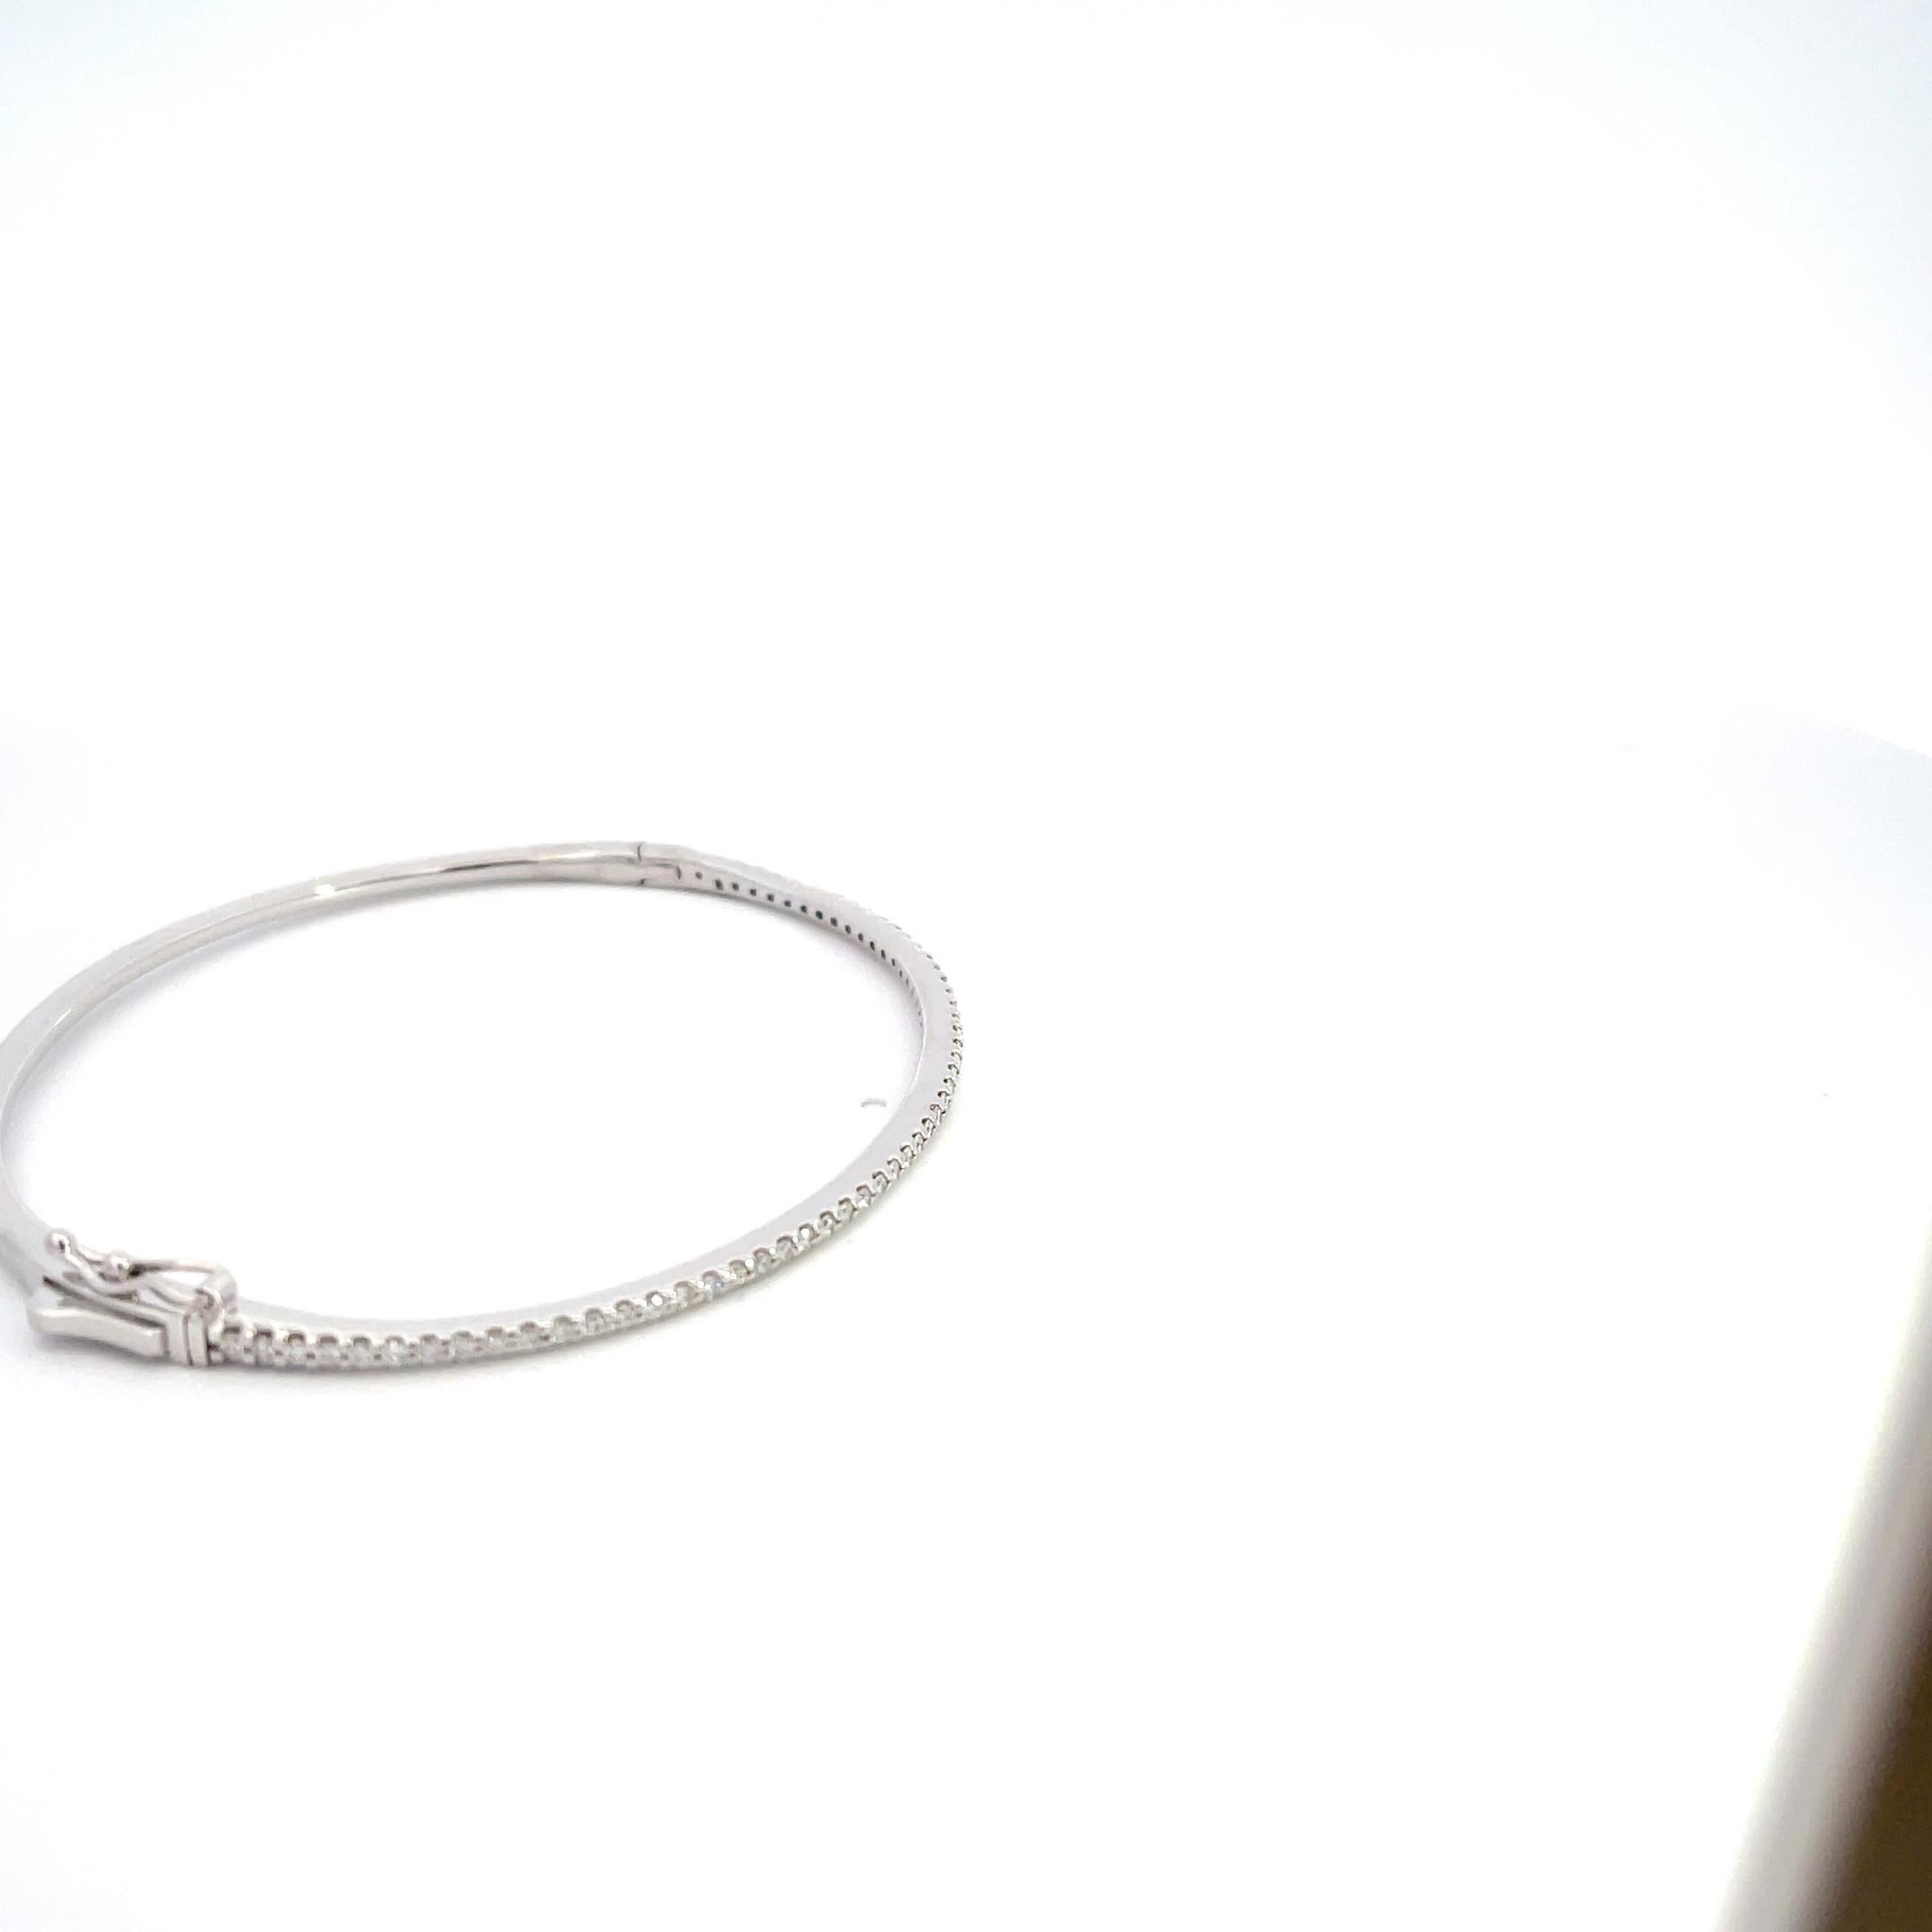 Introducing our exquisite 14K White Gold 0.63ctw Diamond Bangle – a timeless masterpiece that effortlessly combines sophistication and luxury. Crafted with meticulous attention to detail, this bangle is a true symbol of elegance.

Made from lustrous